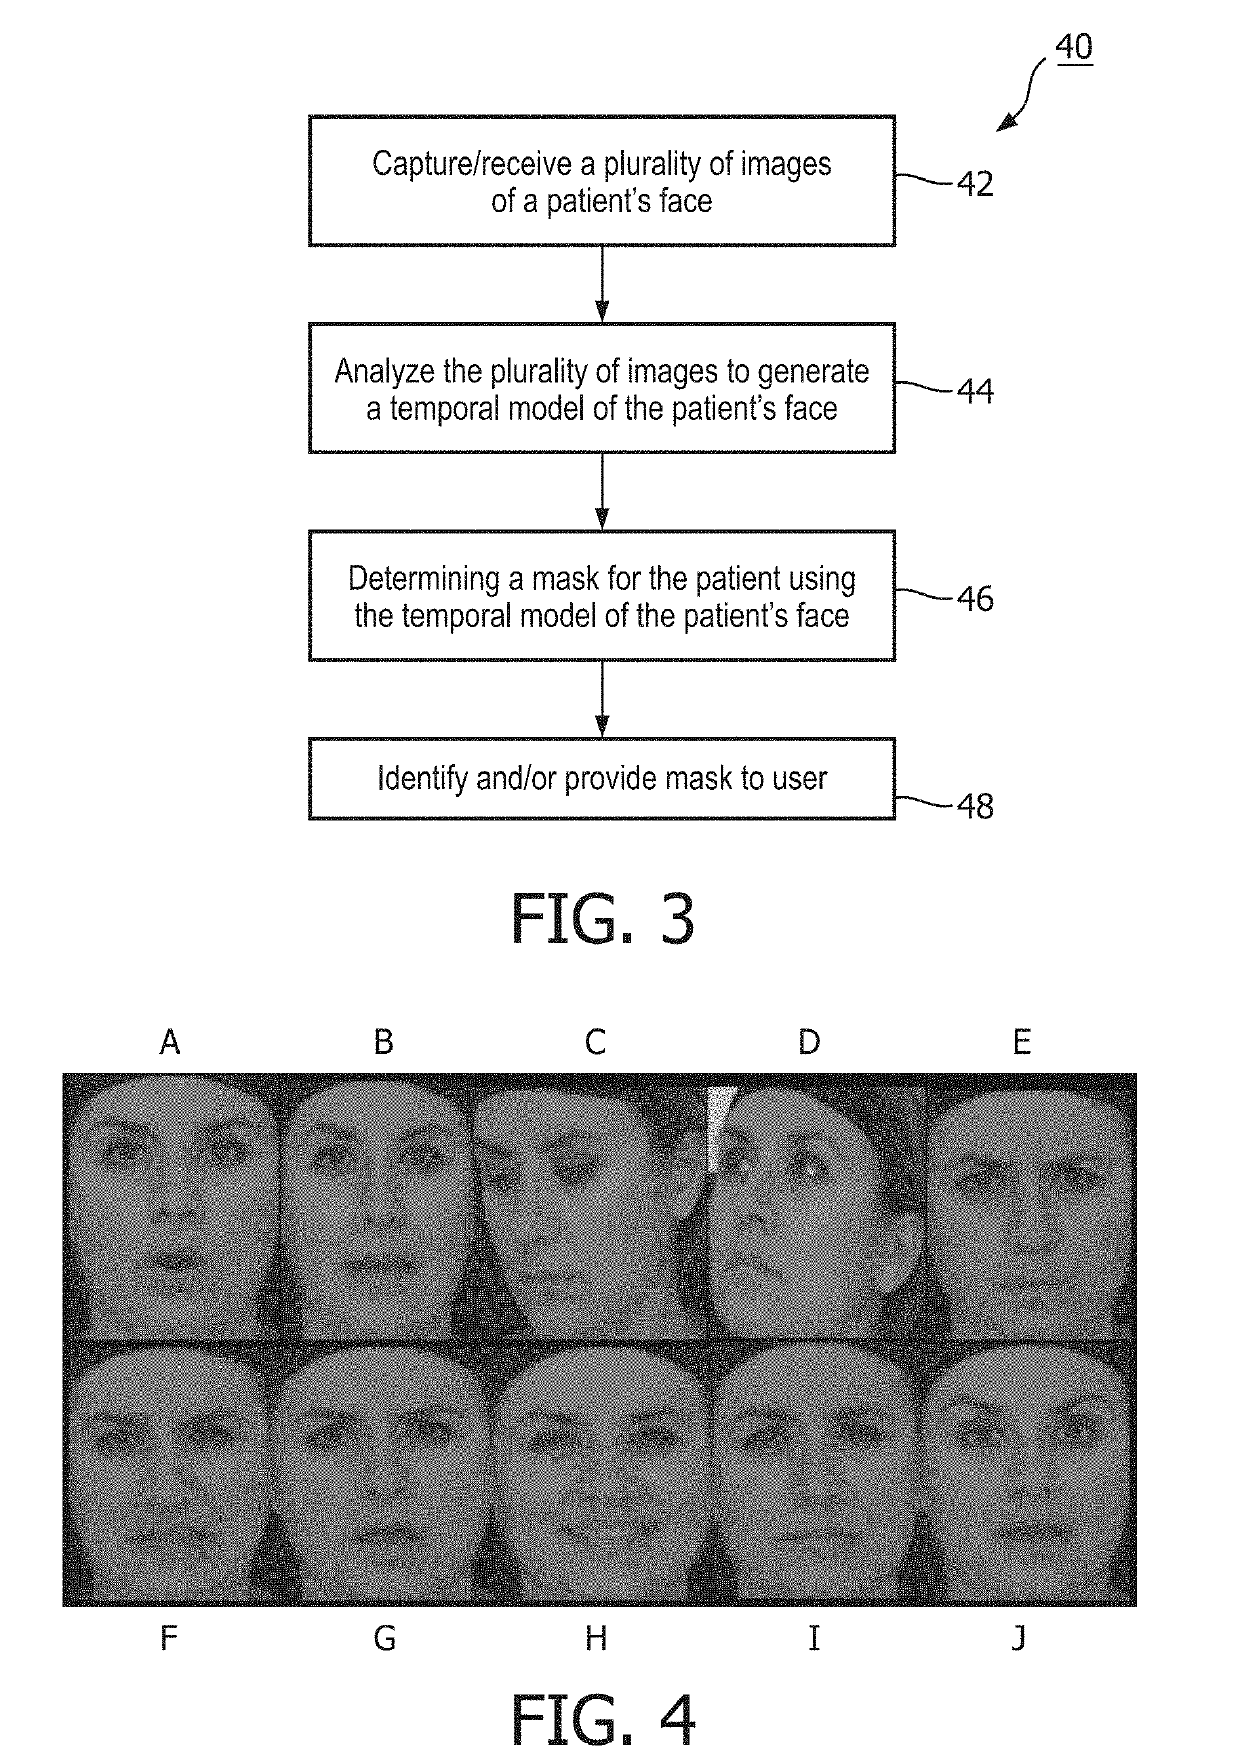 Providing a mask for a patient based on a temporal model generated from a plurality of facial scans